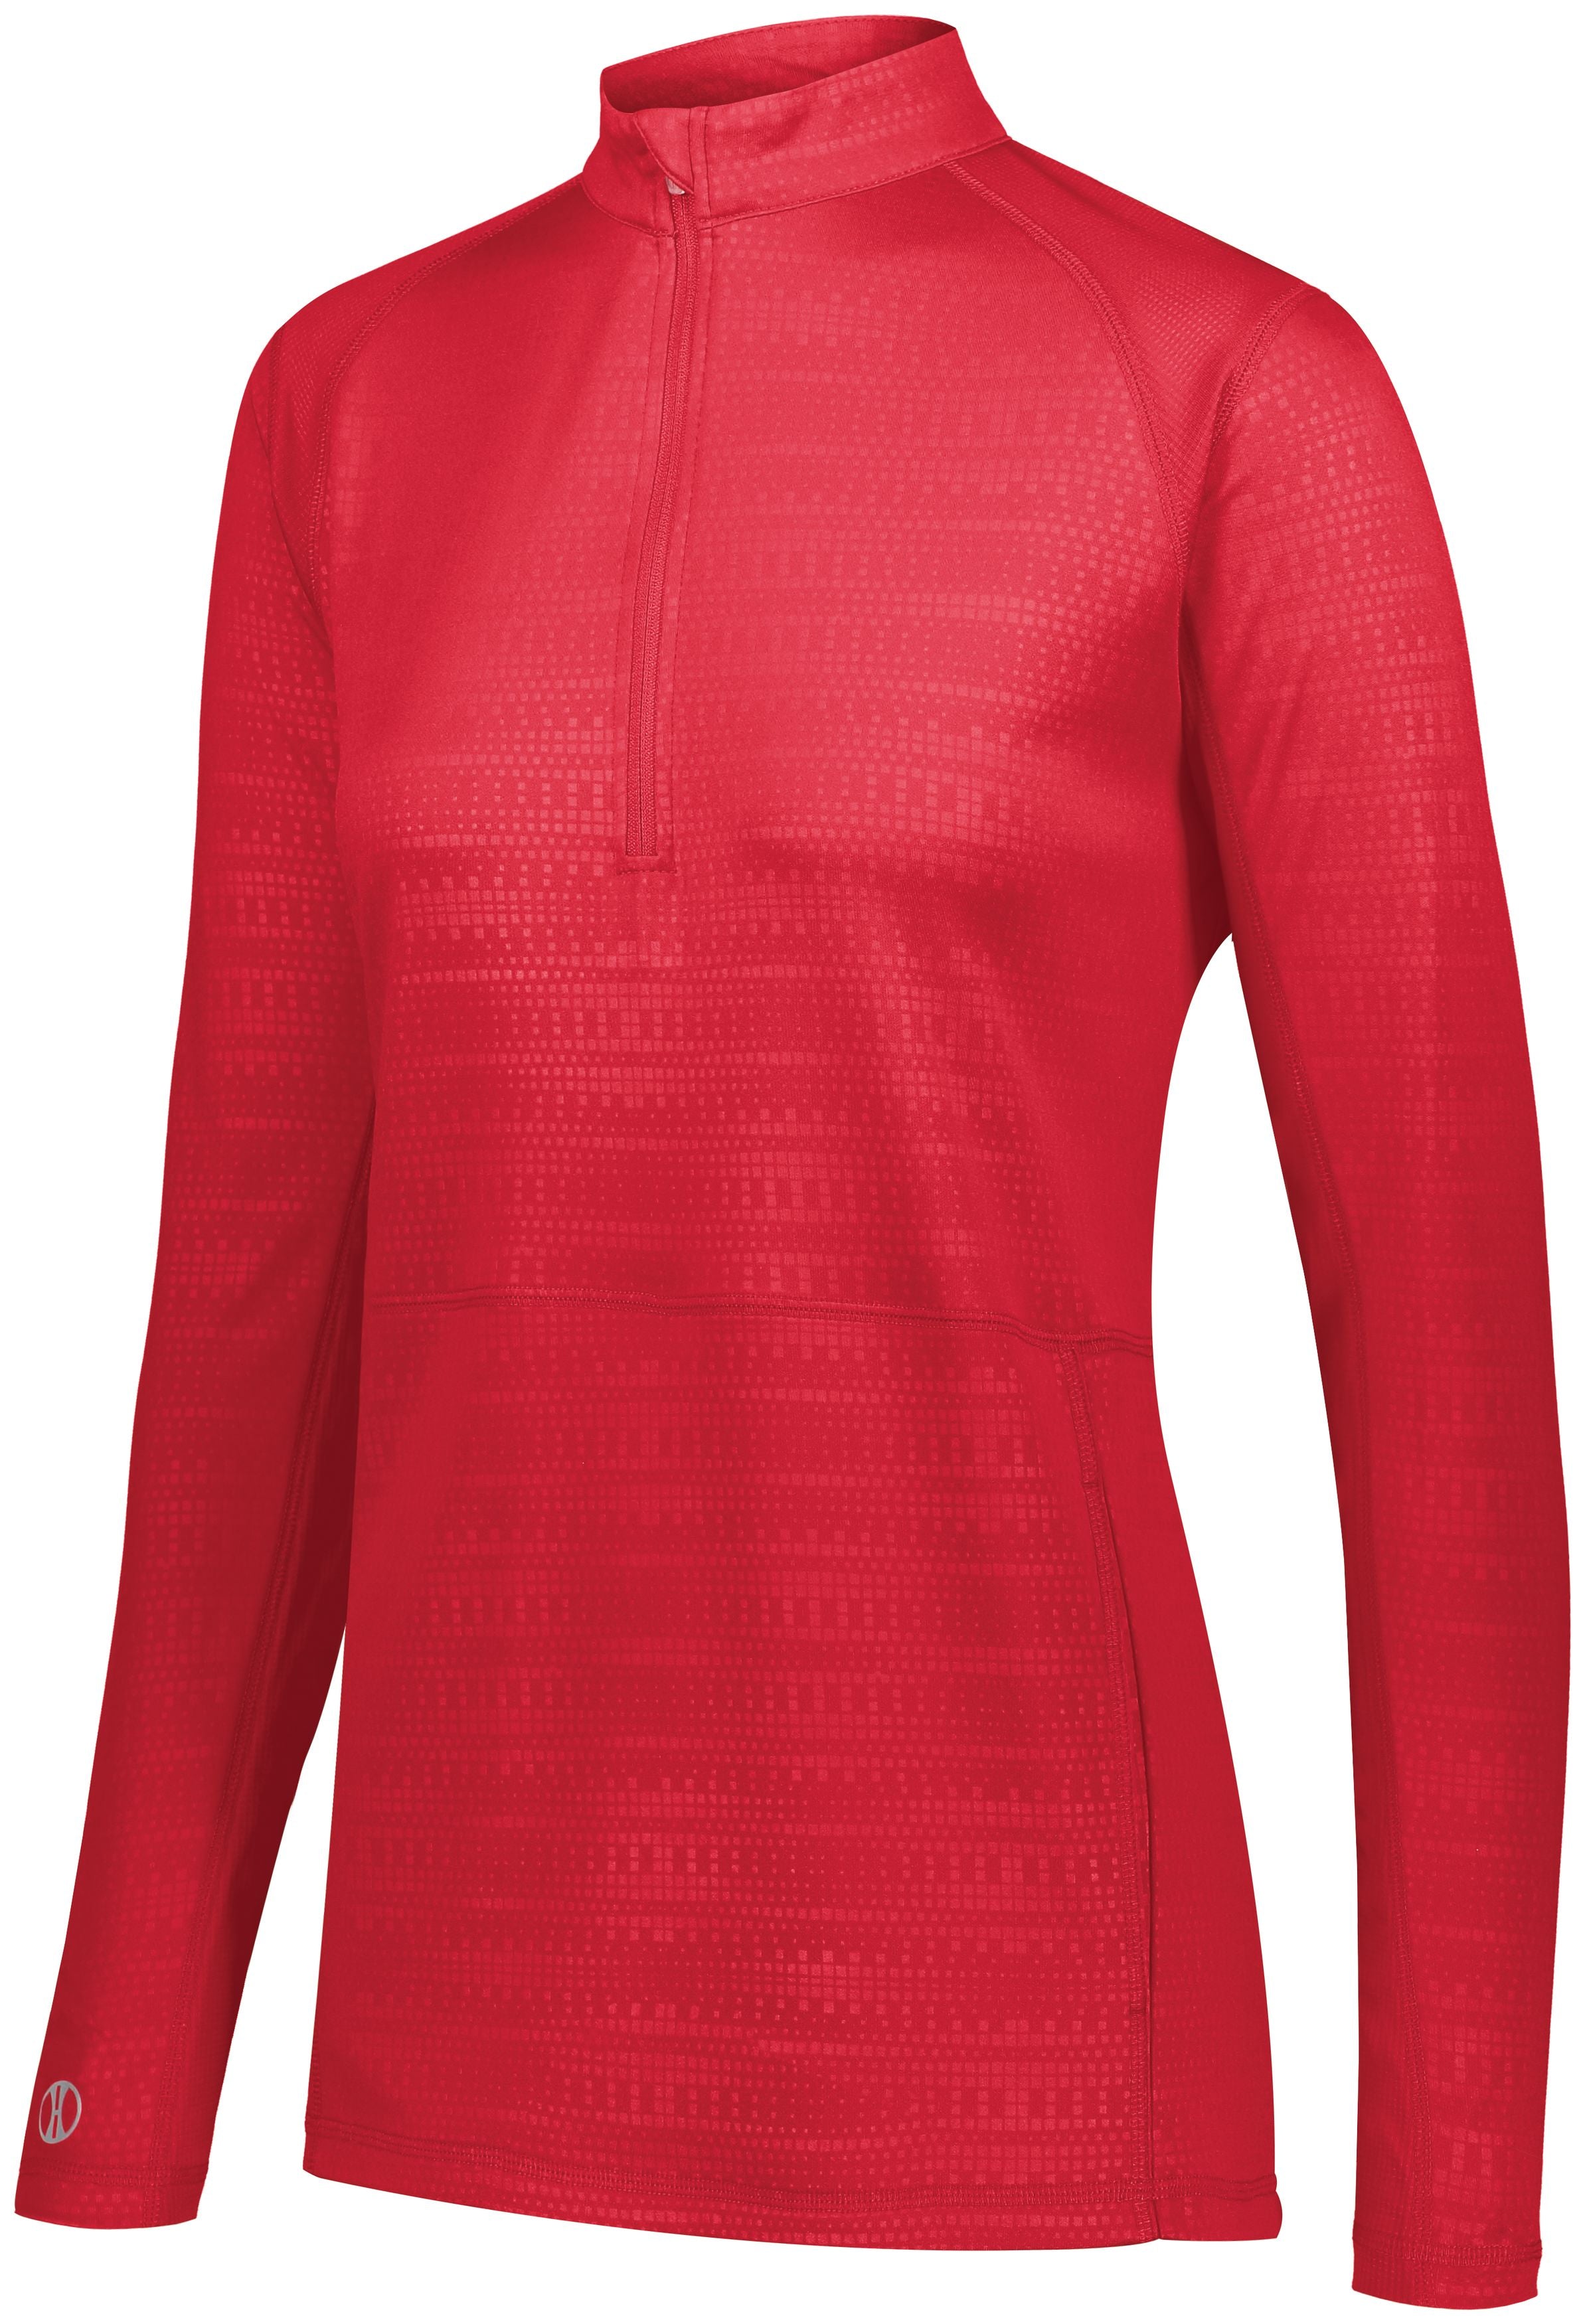 Holloway Ladies Converge 1/2 Zip Pullover in Scarlet  -Part of the Ladies, Holloway, Shirts, Corporate-Collection, Converge-Collection product lines at KanaleyCreations.com